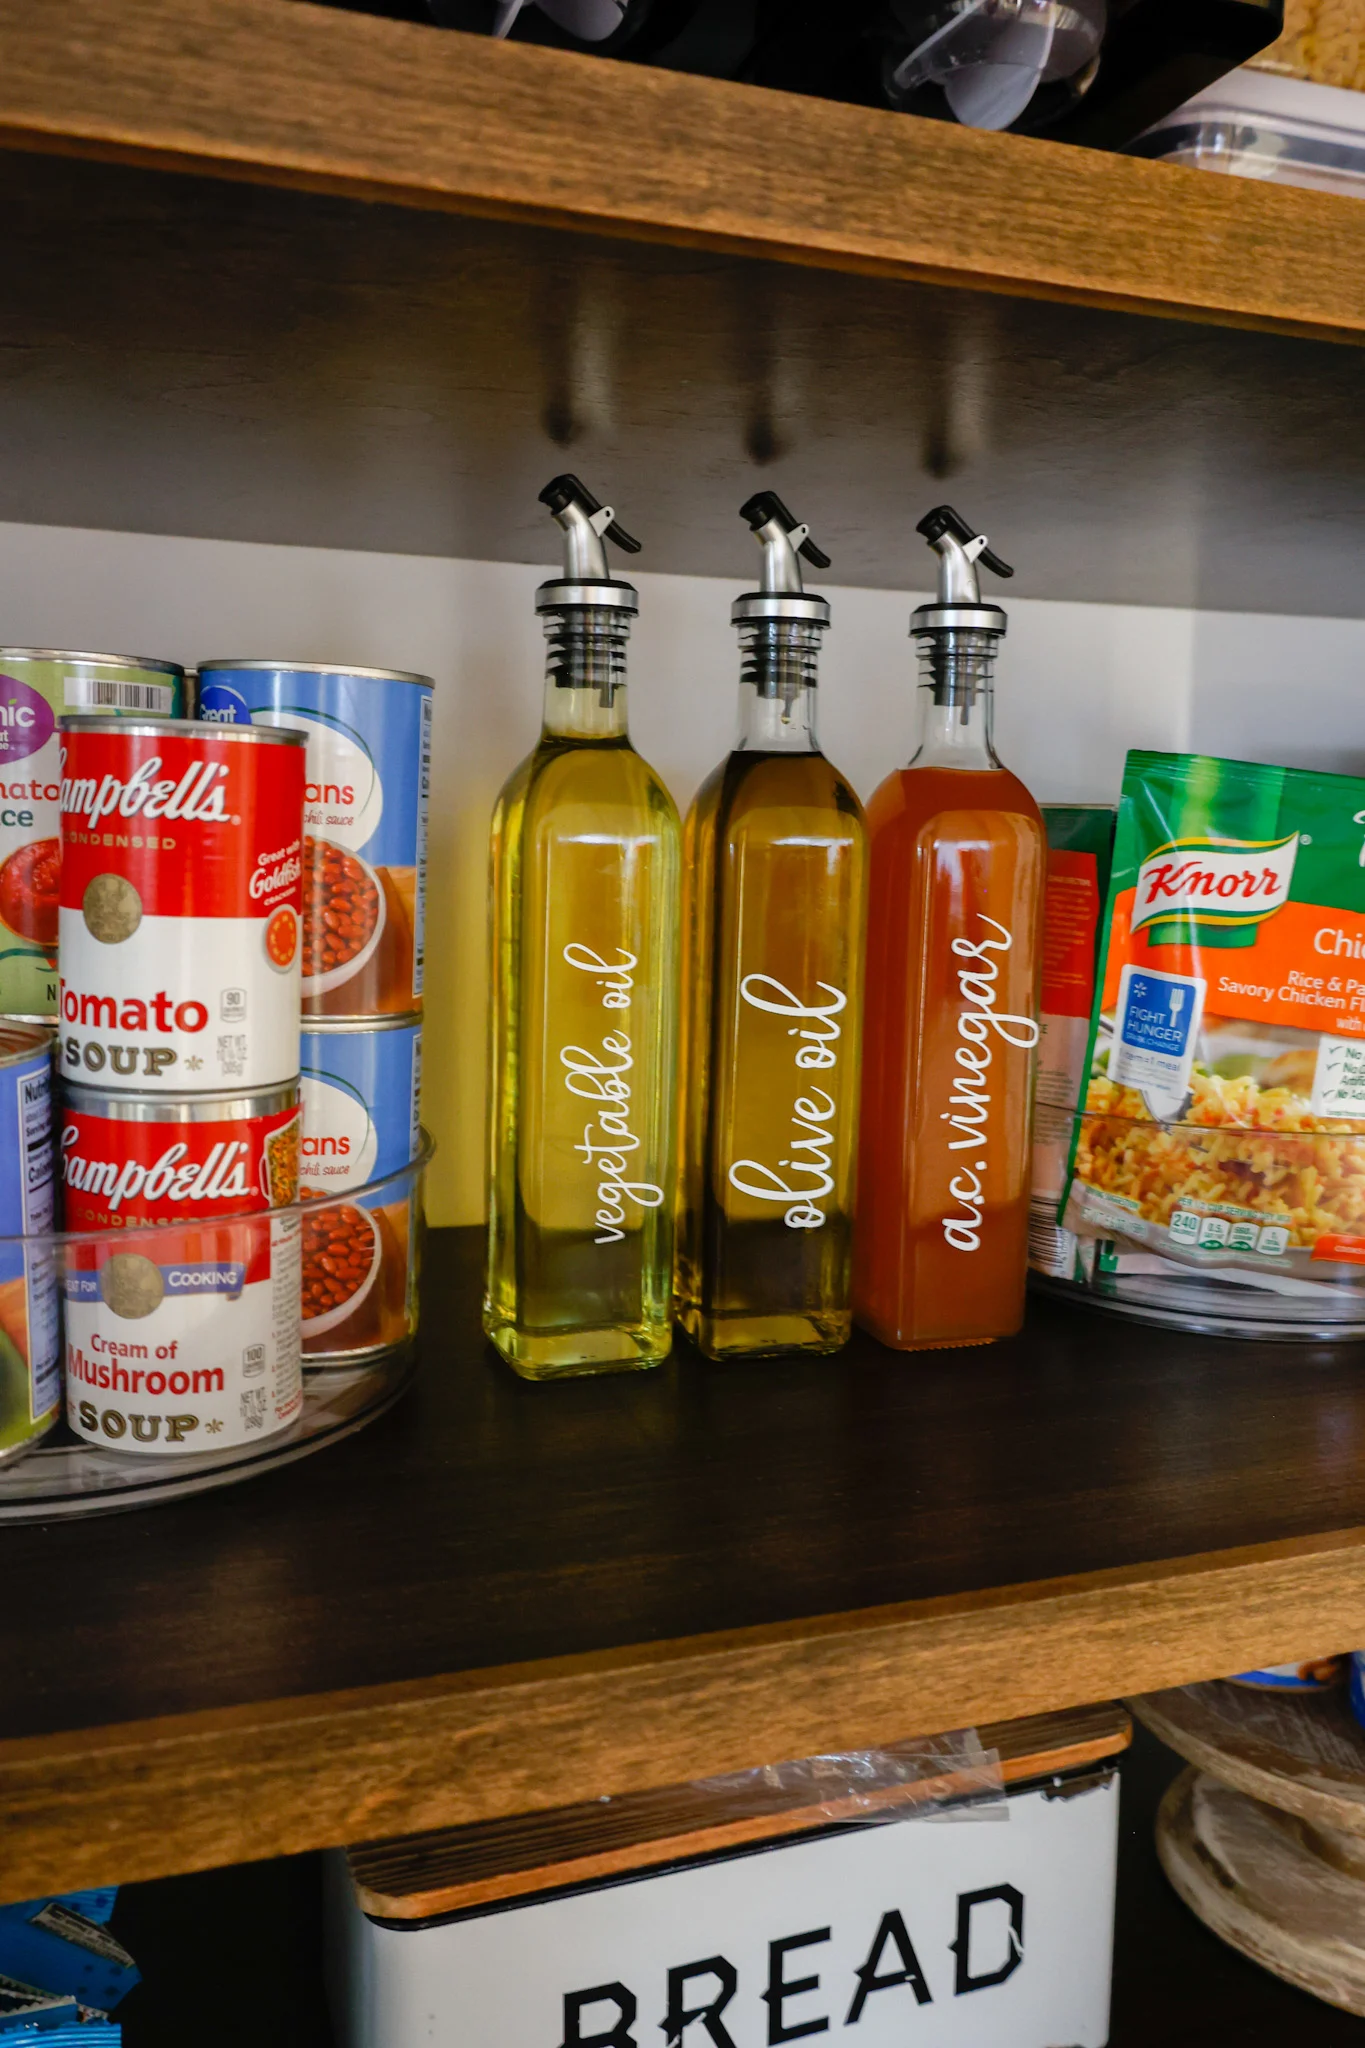 cabinet organization ideas for pantry items